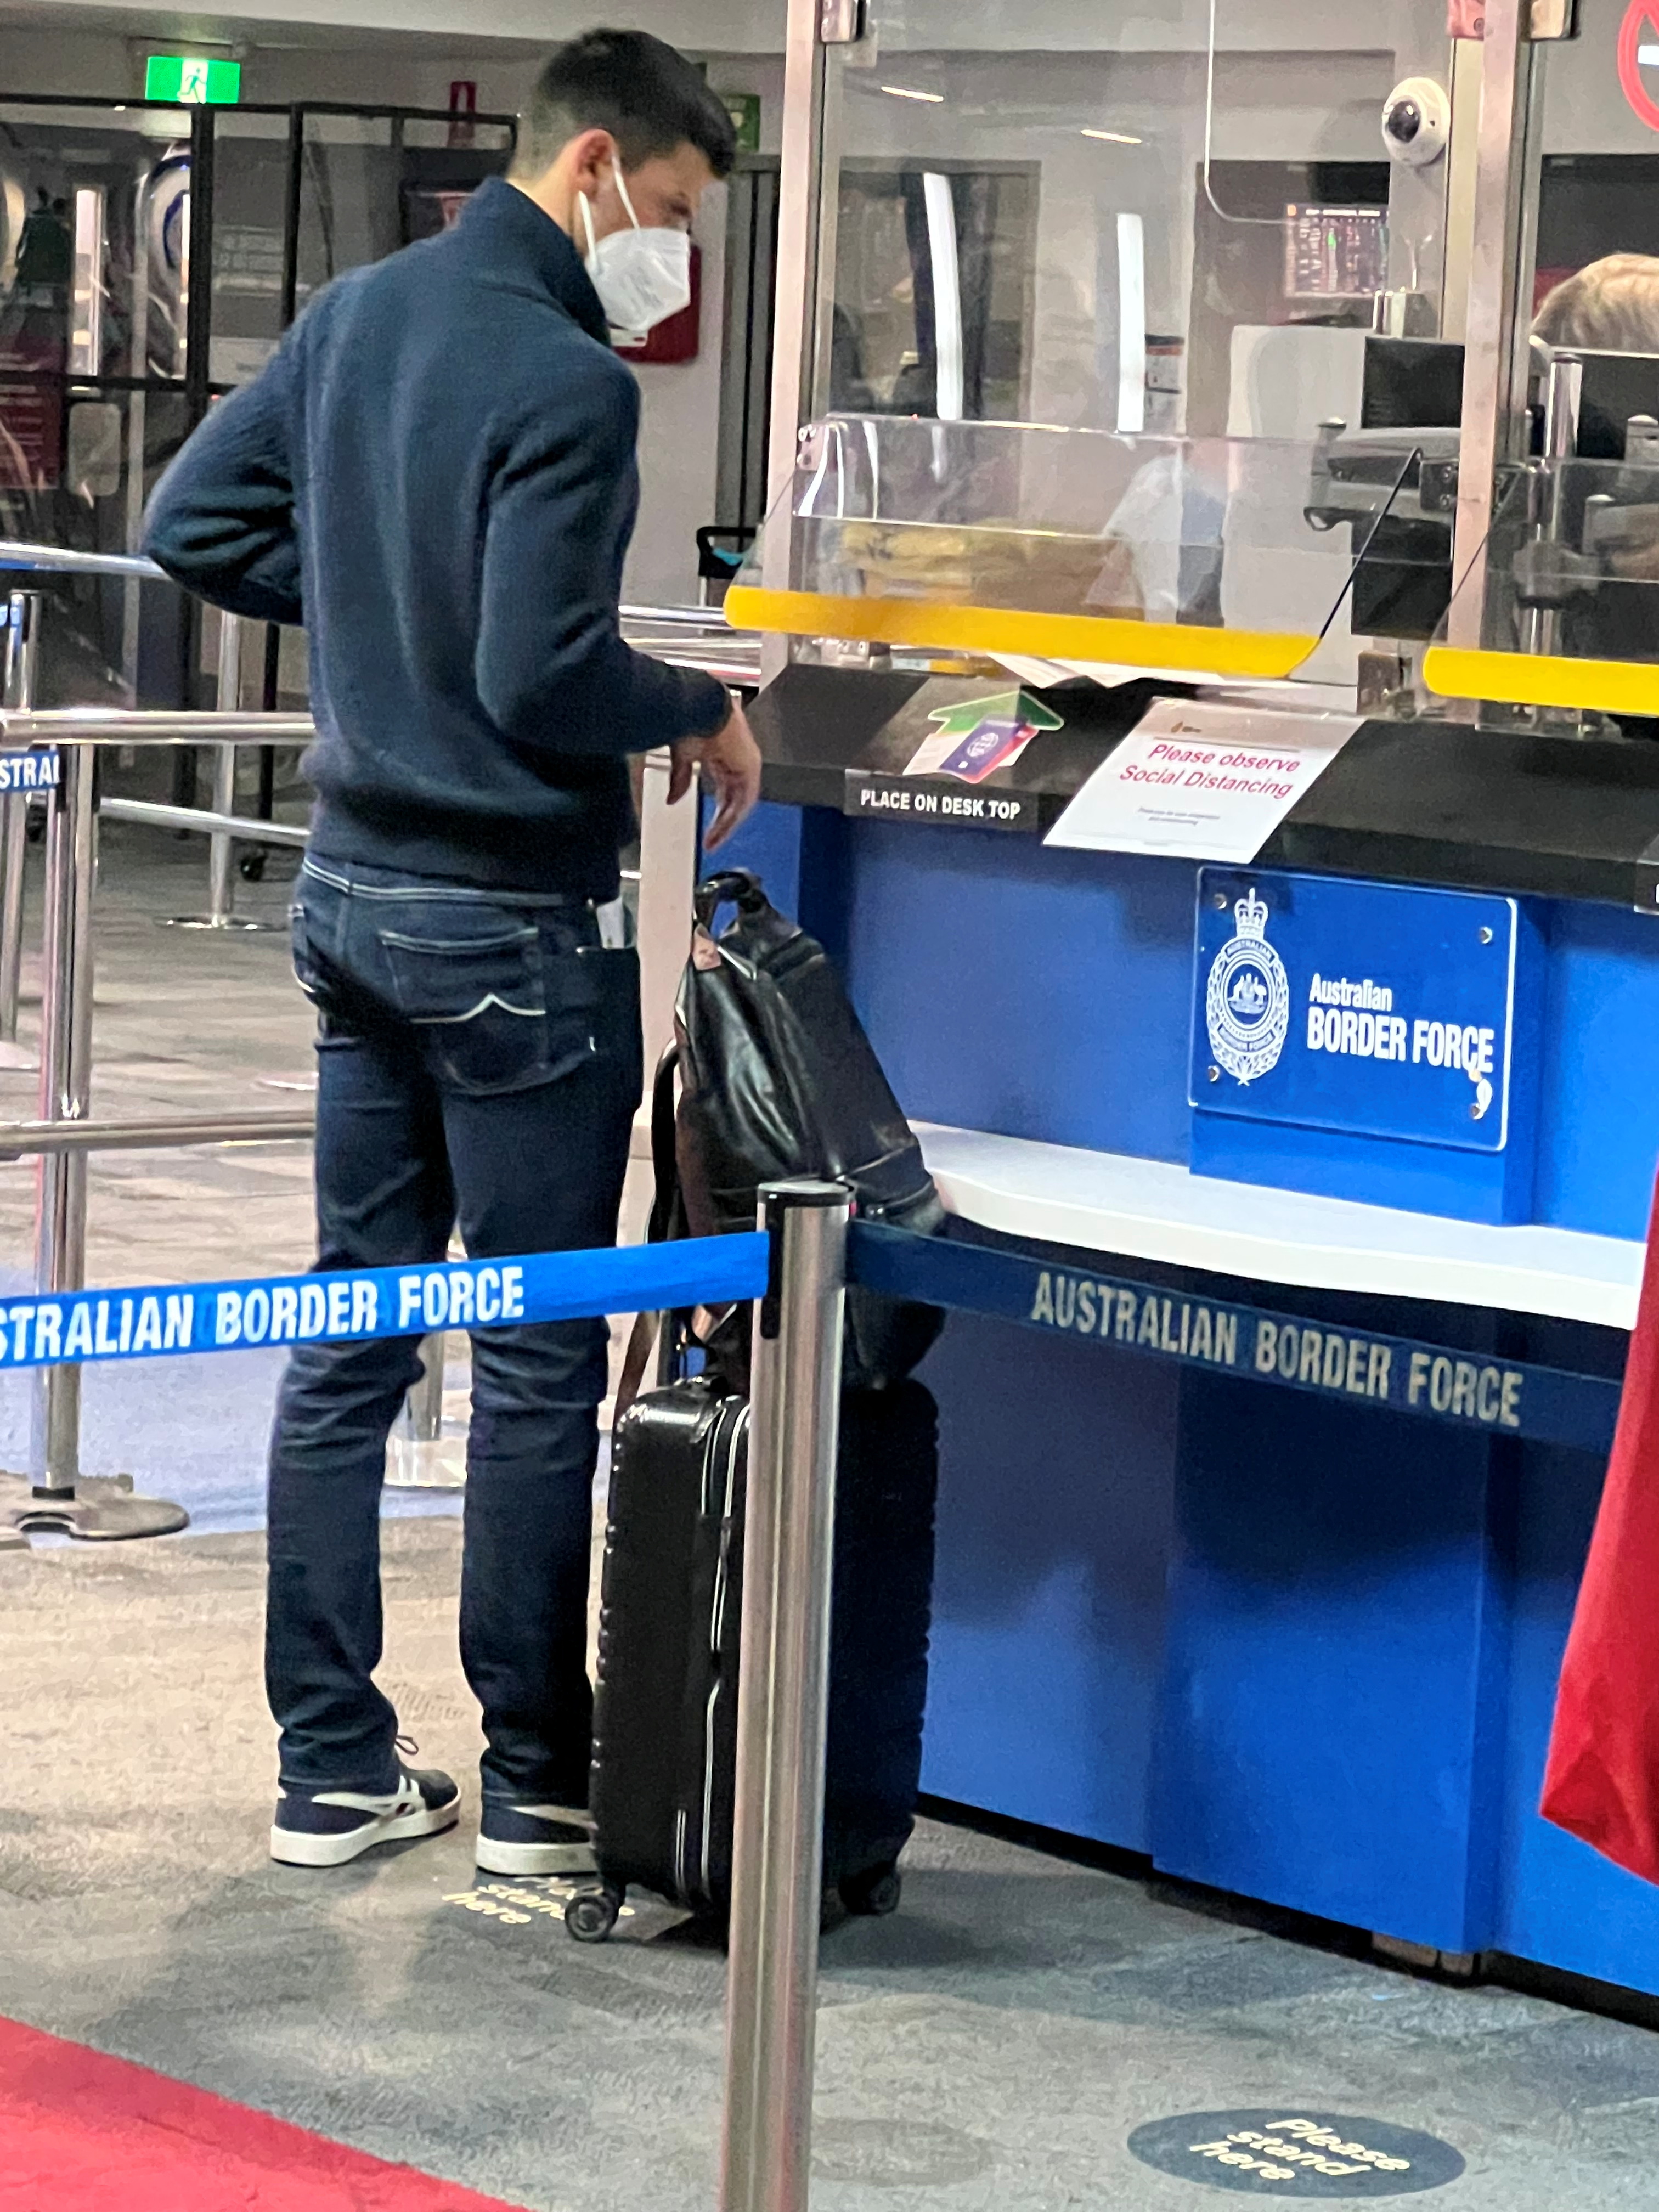 Serbian tennis player Novak Djokovic stands at an Australian Border Force booth at the airport in Melbourne on January 5, 2022. 